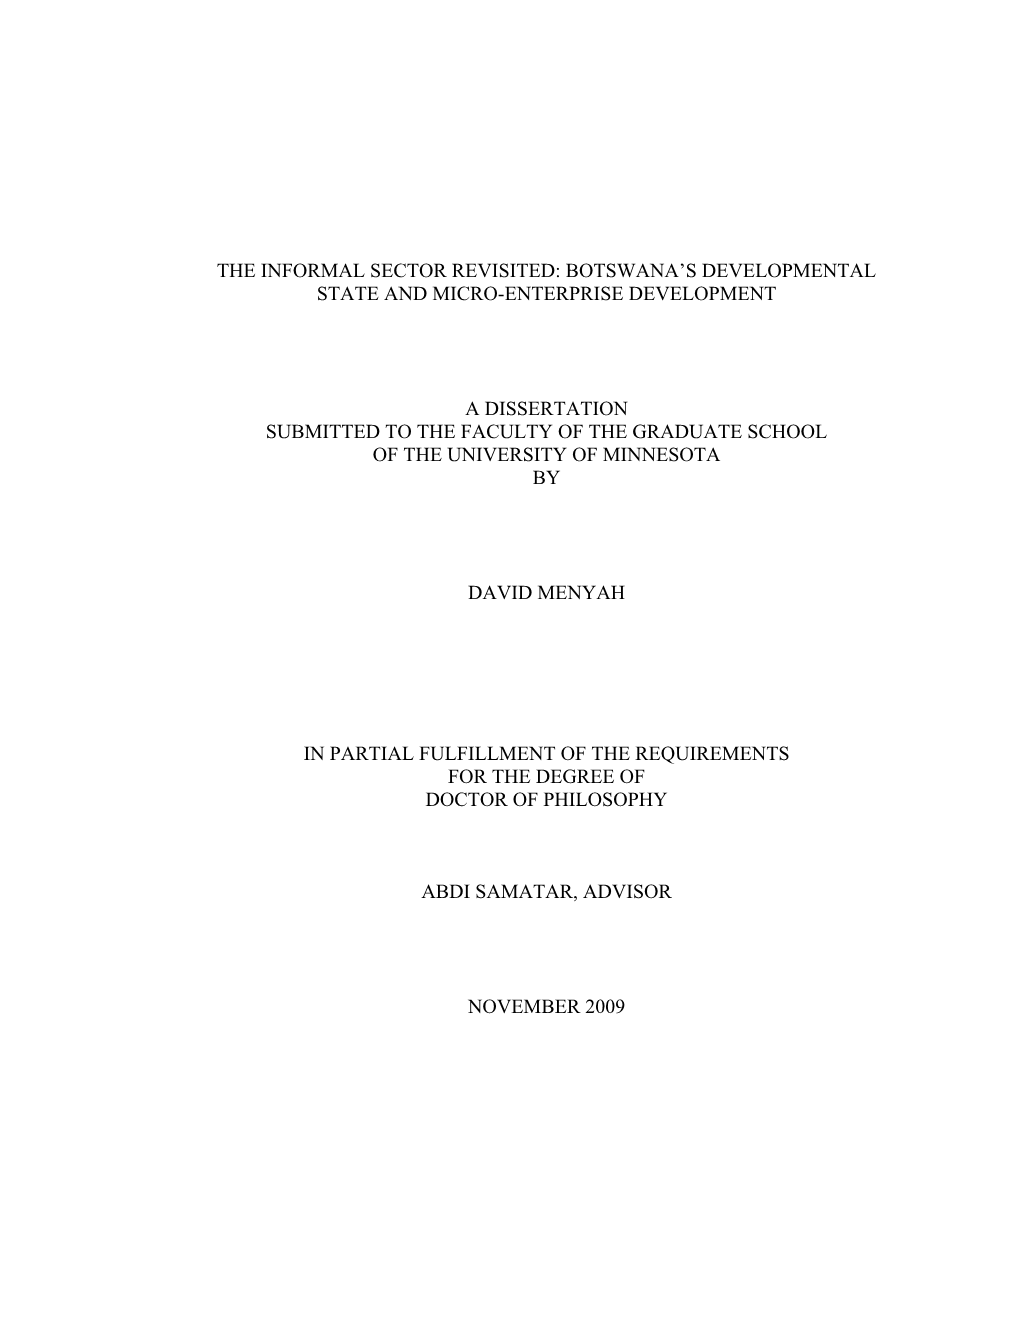 The Informal Sector Revisited: Botswana's Developmental State and Micro-Enterprise Development a Dissertation Submitted To